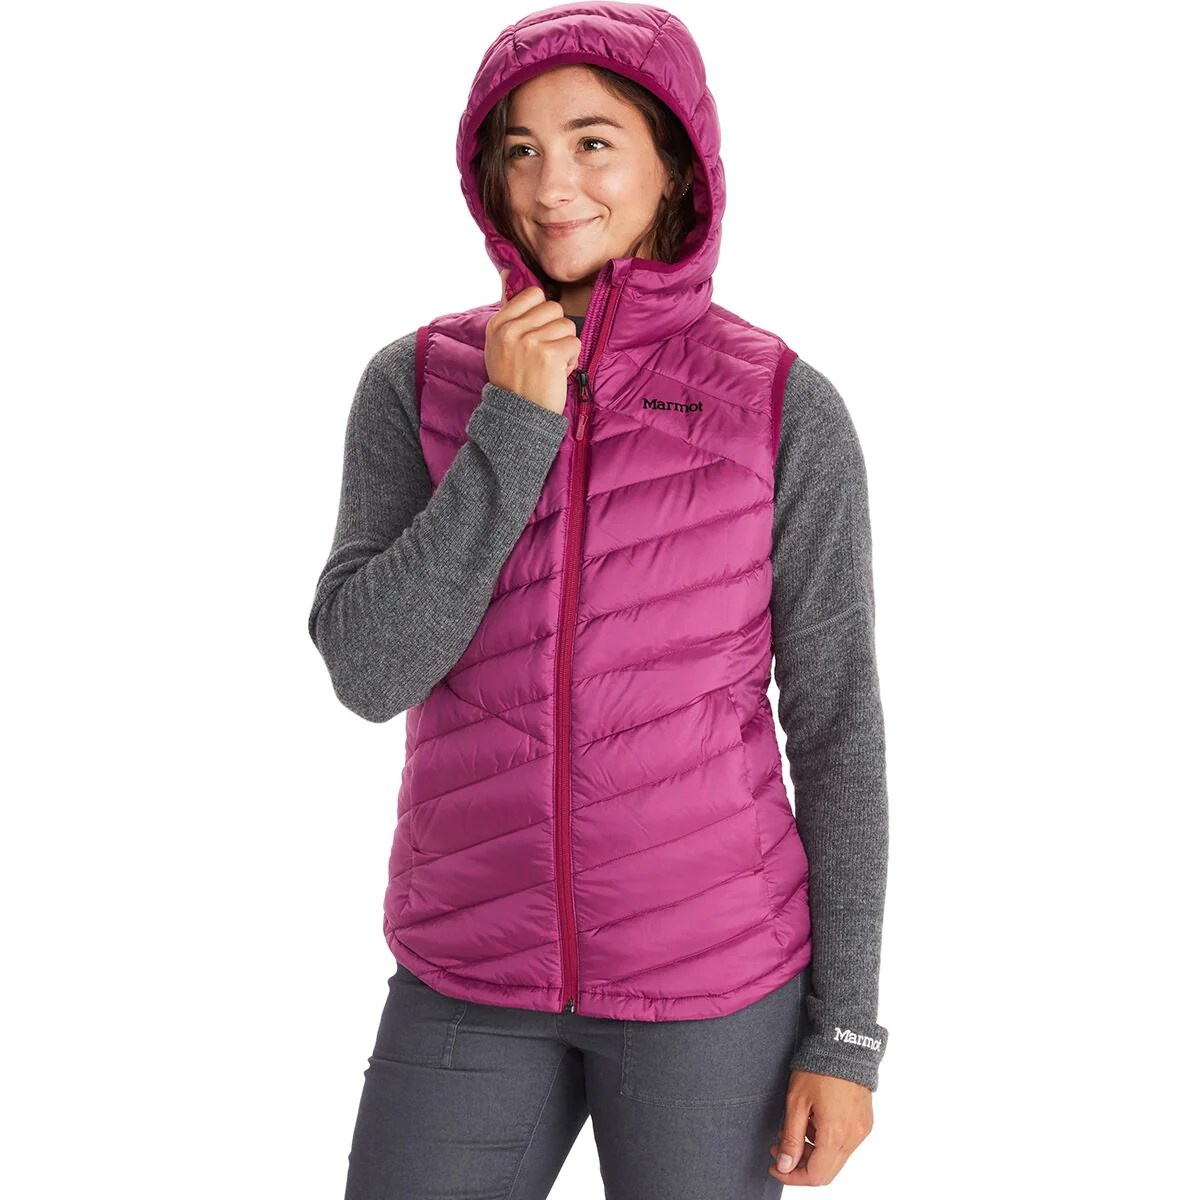 model wearing a bright rose highlander vest which is on sale at backcountry, with a gray long sleeve underneath